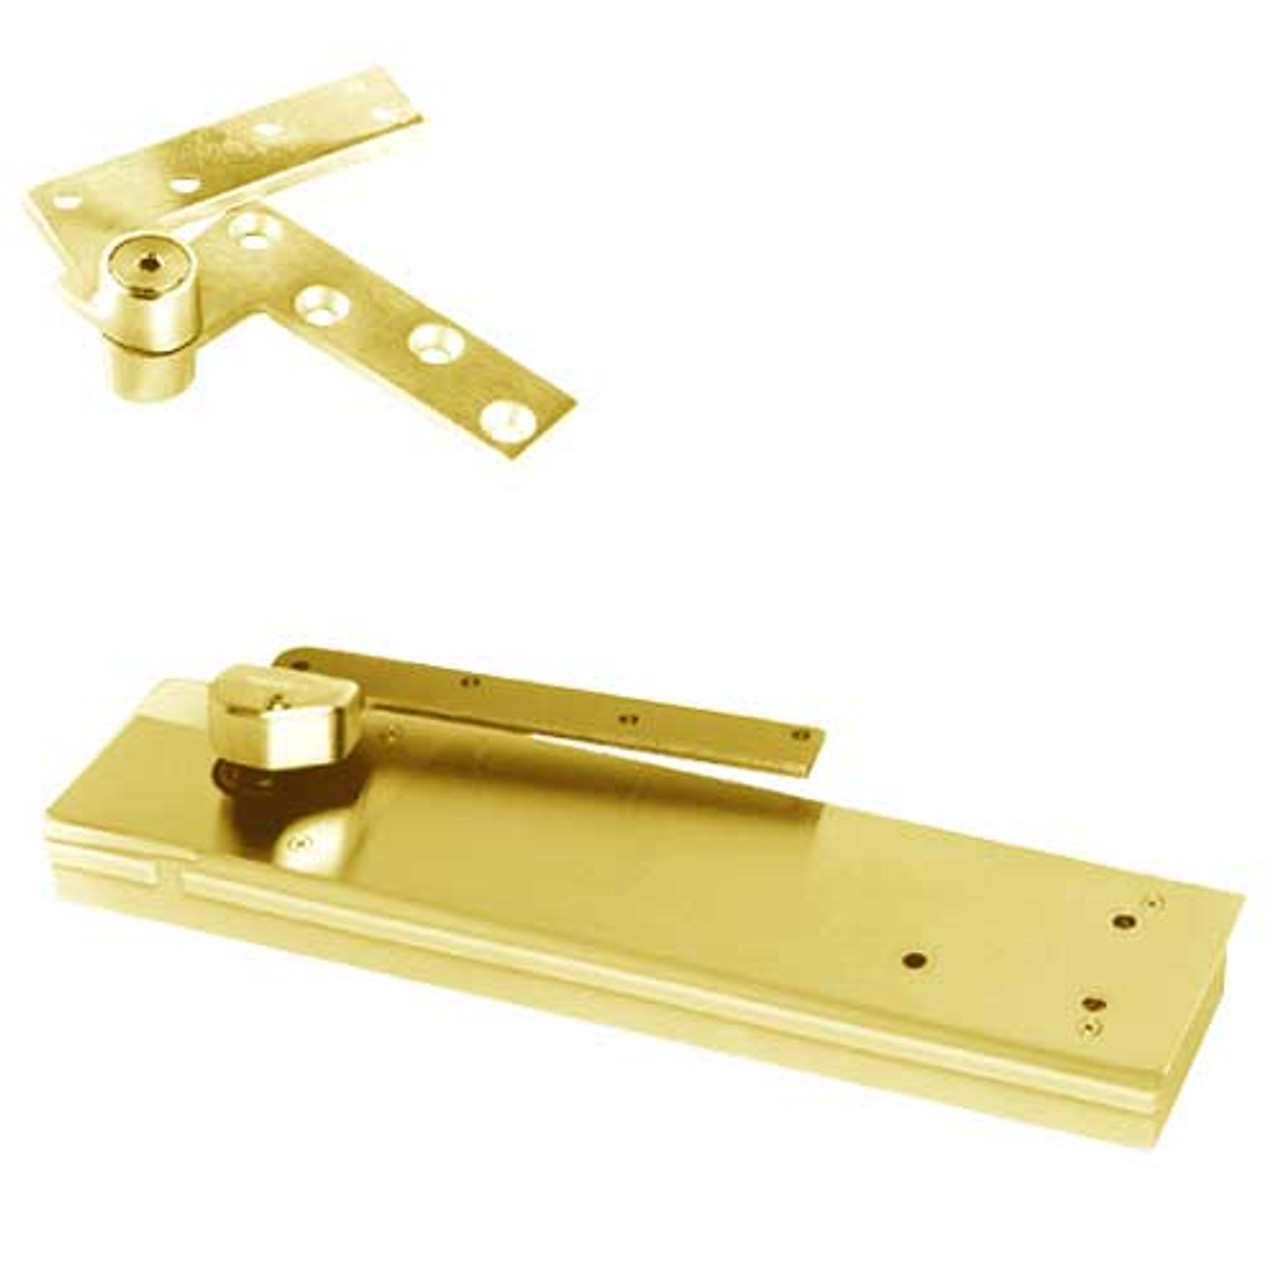 5103ABC180-1-1/2OS-LFP-LTP-RH-605 Rixson 51 Series 1-1/2" Offset Hung Shallow Depth Floor Closers in Bright Brass Finish